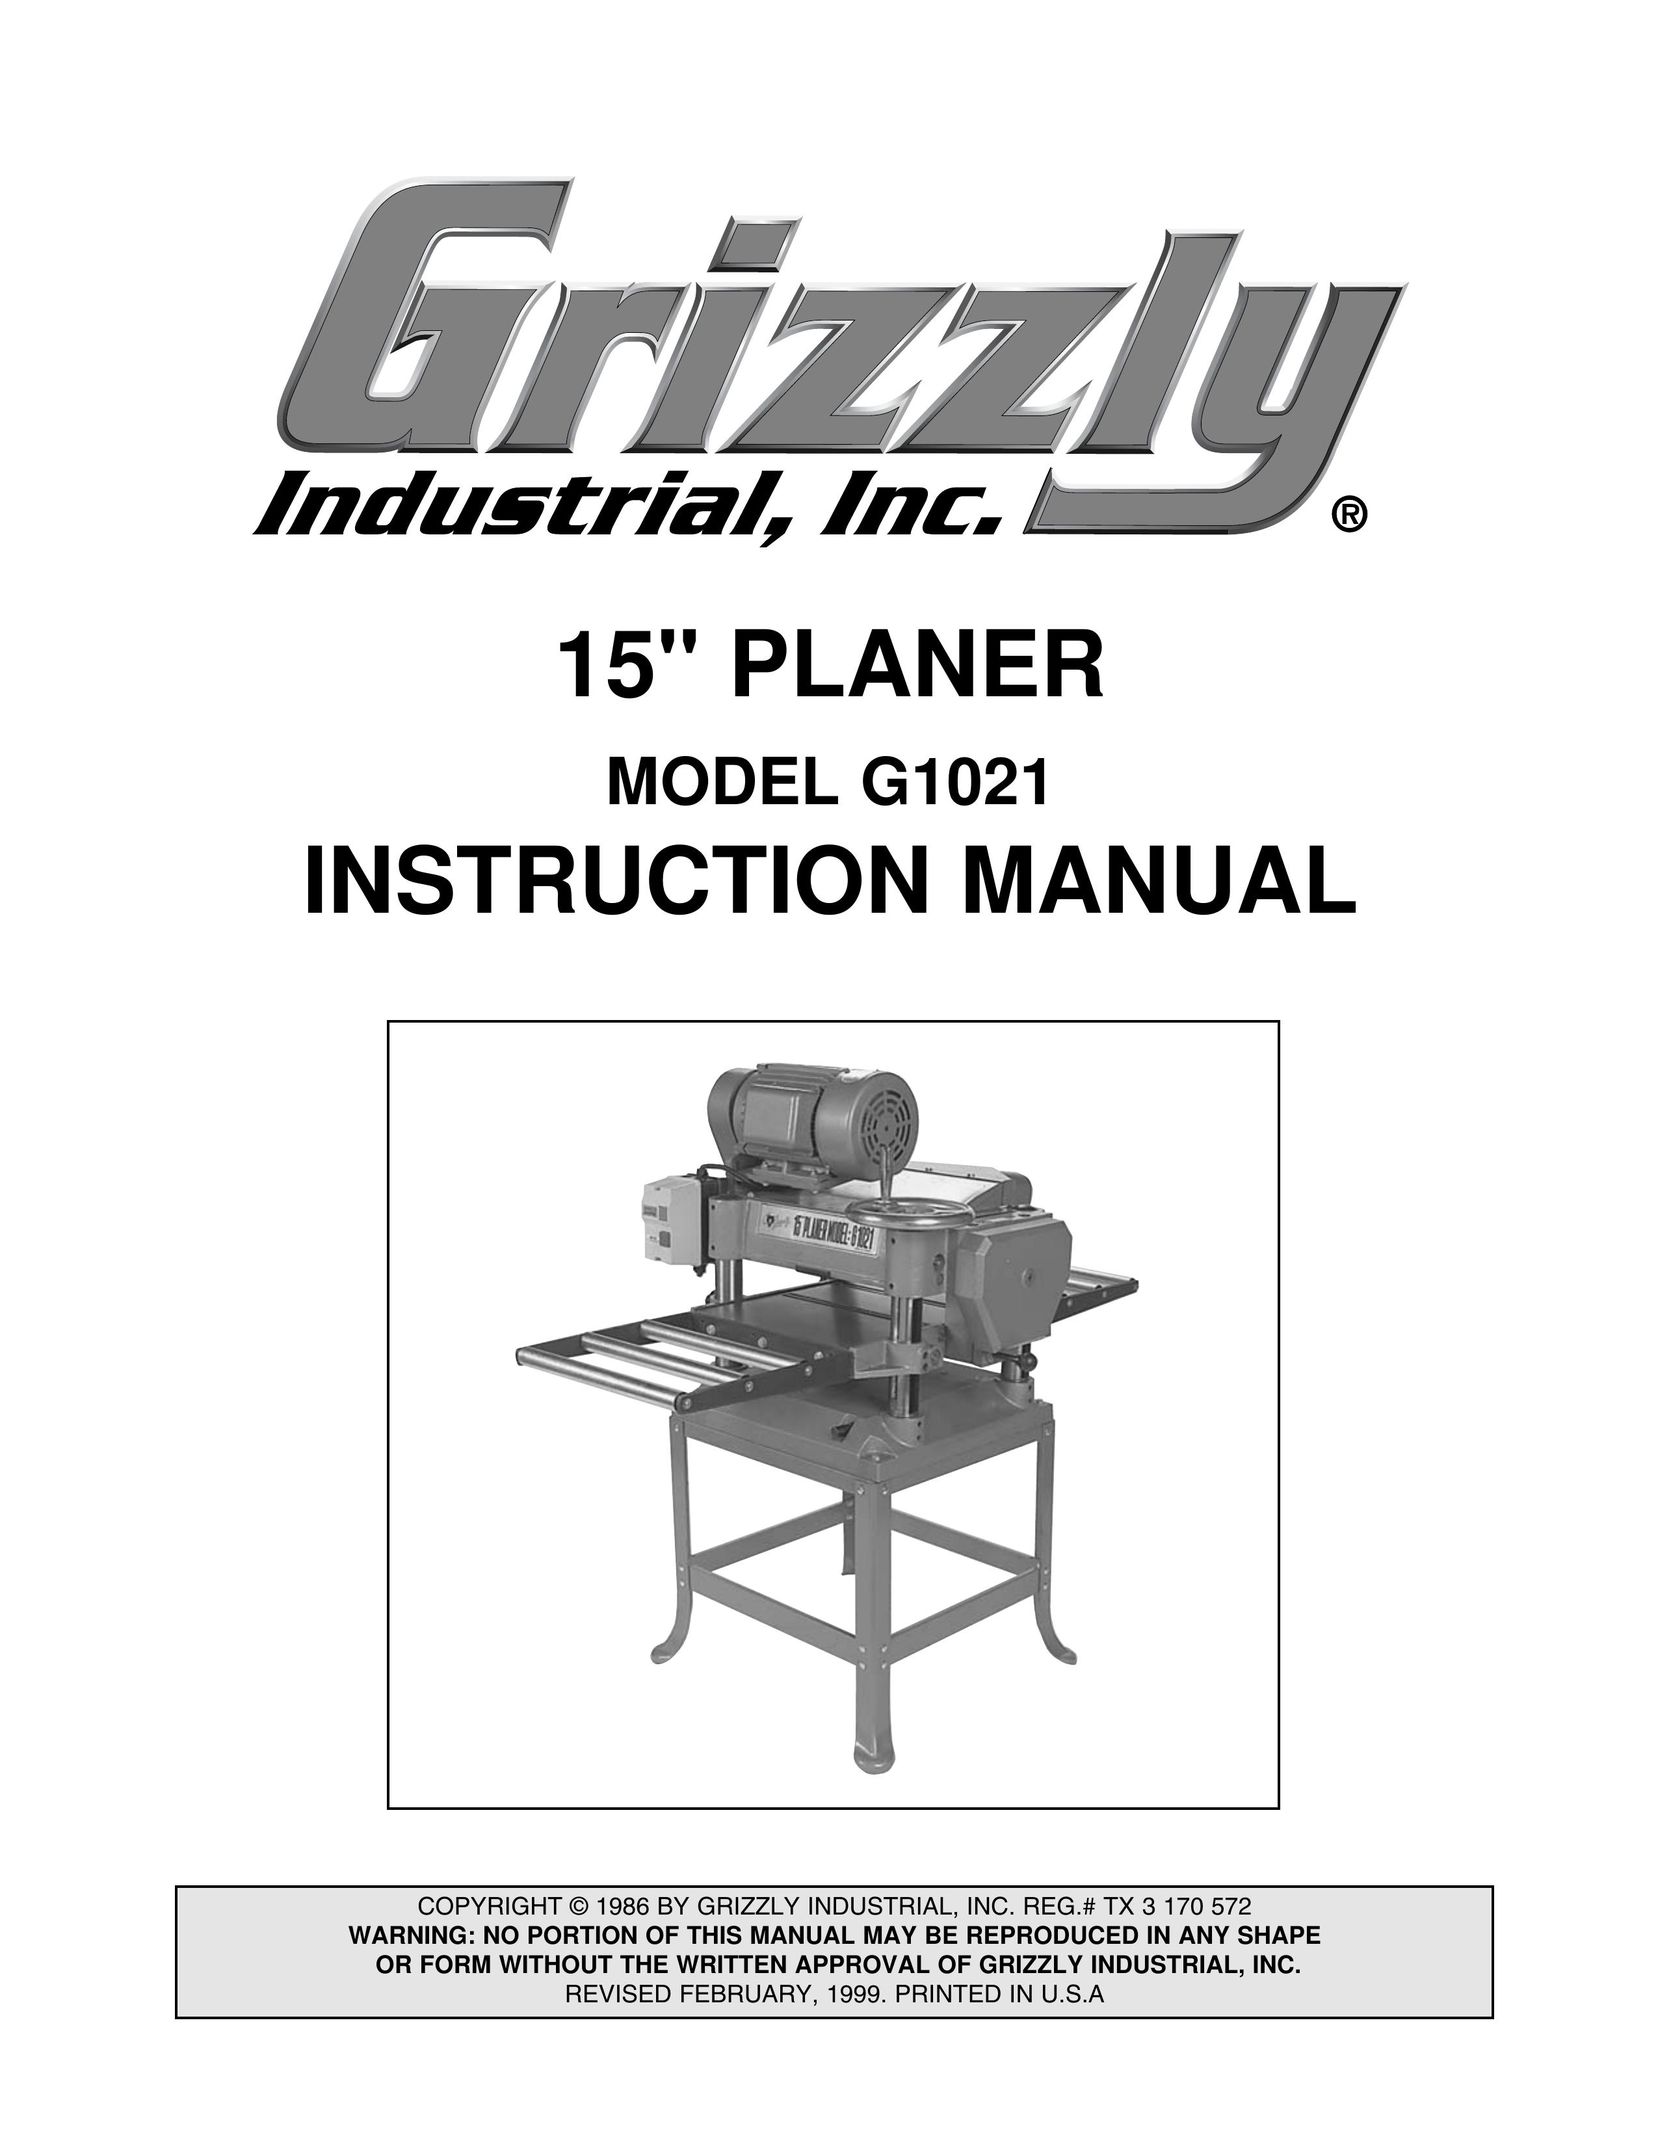 Grizzly G1021 Planer User Manual